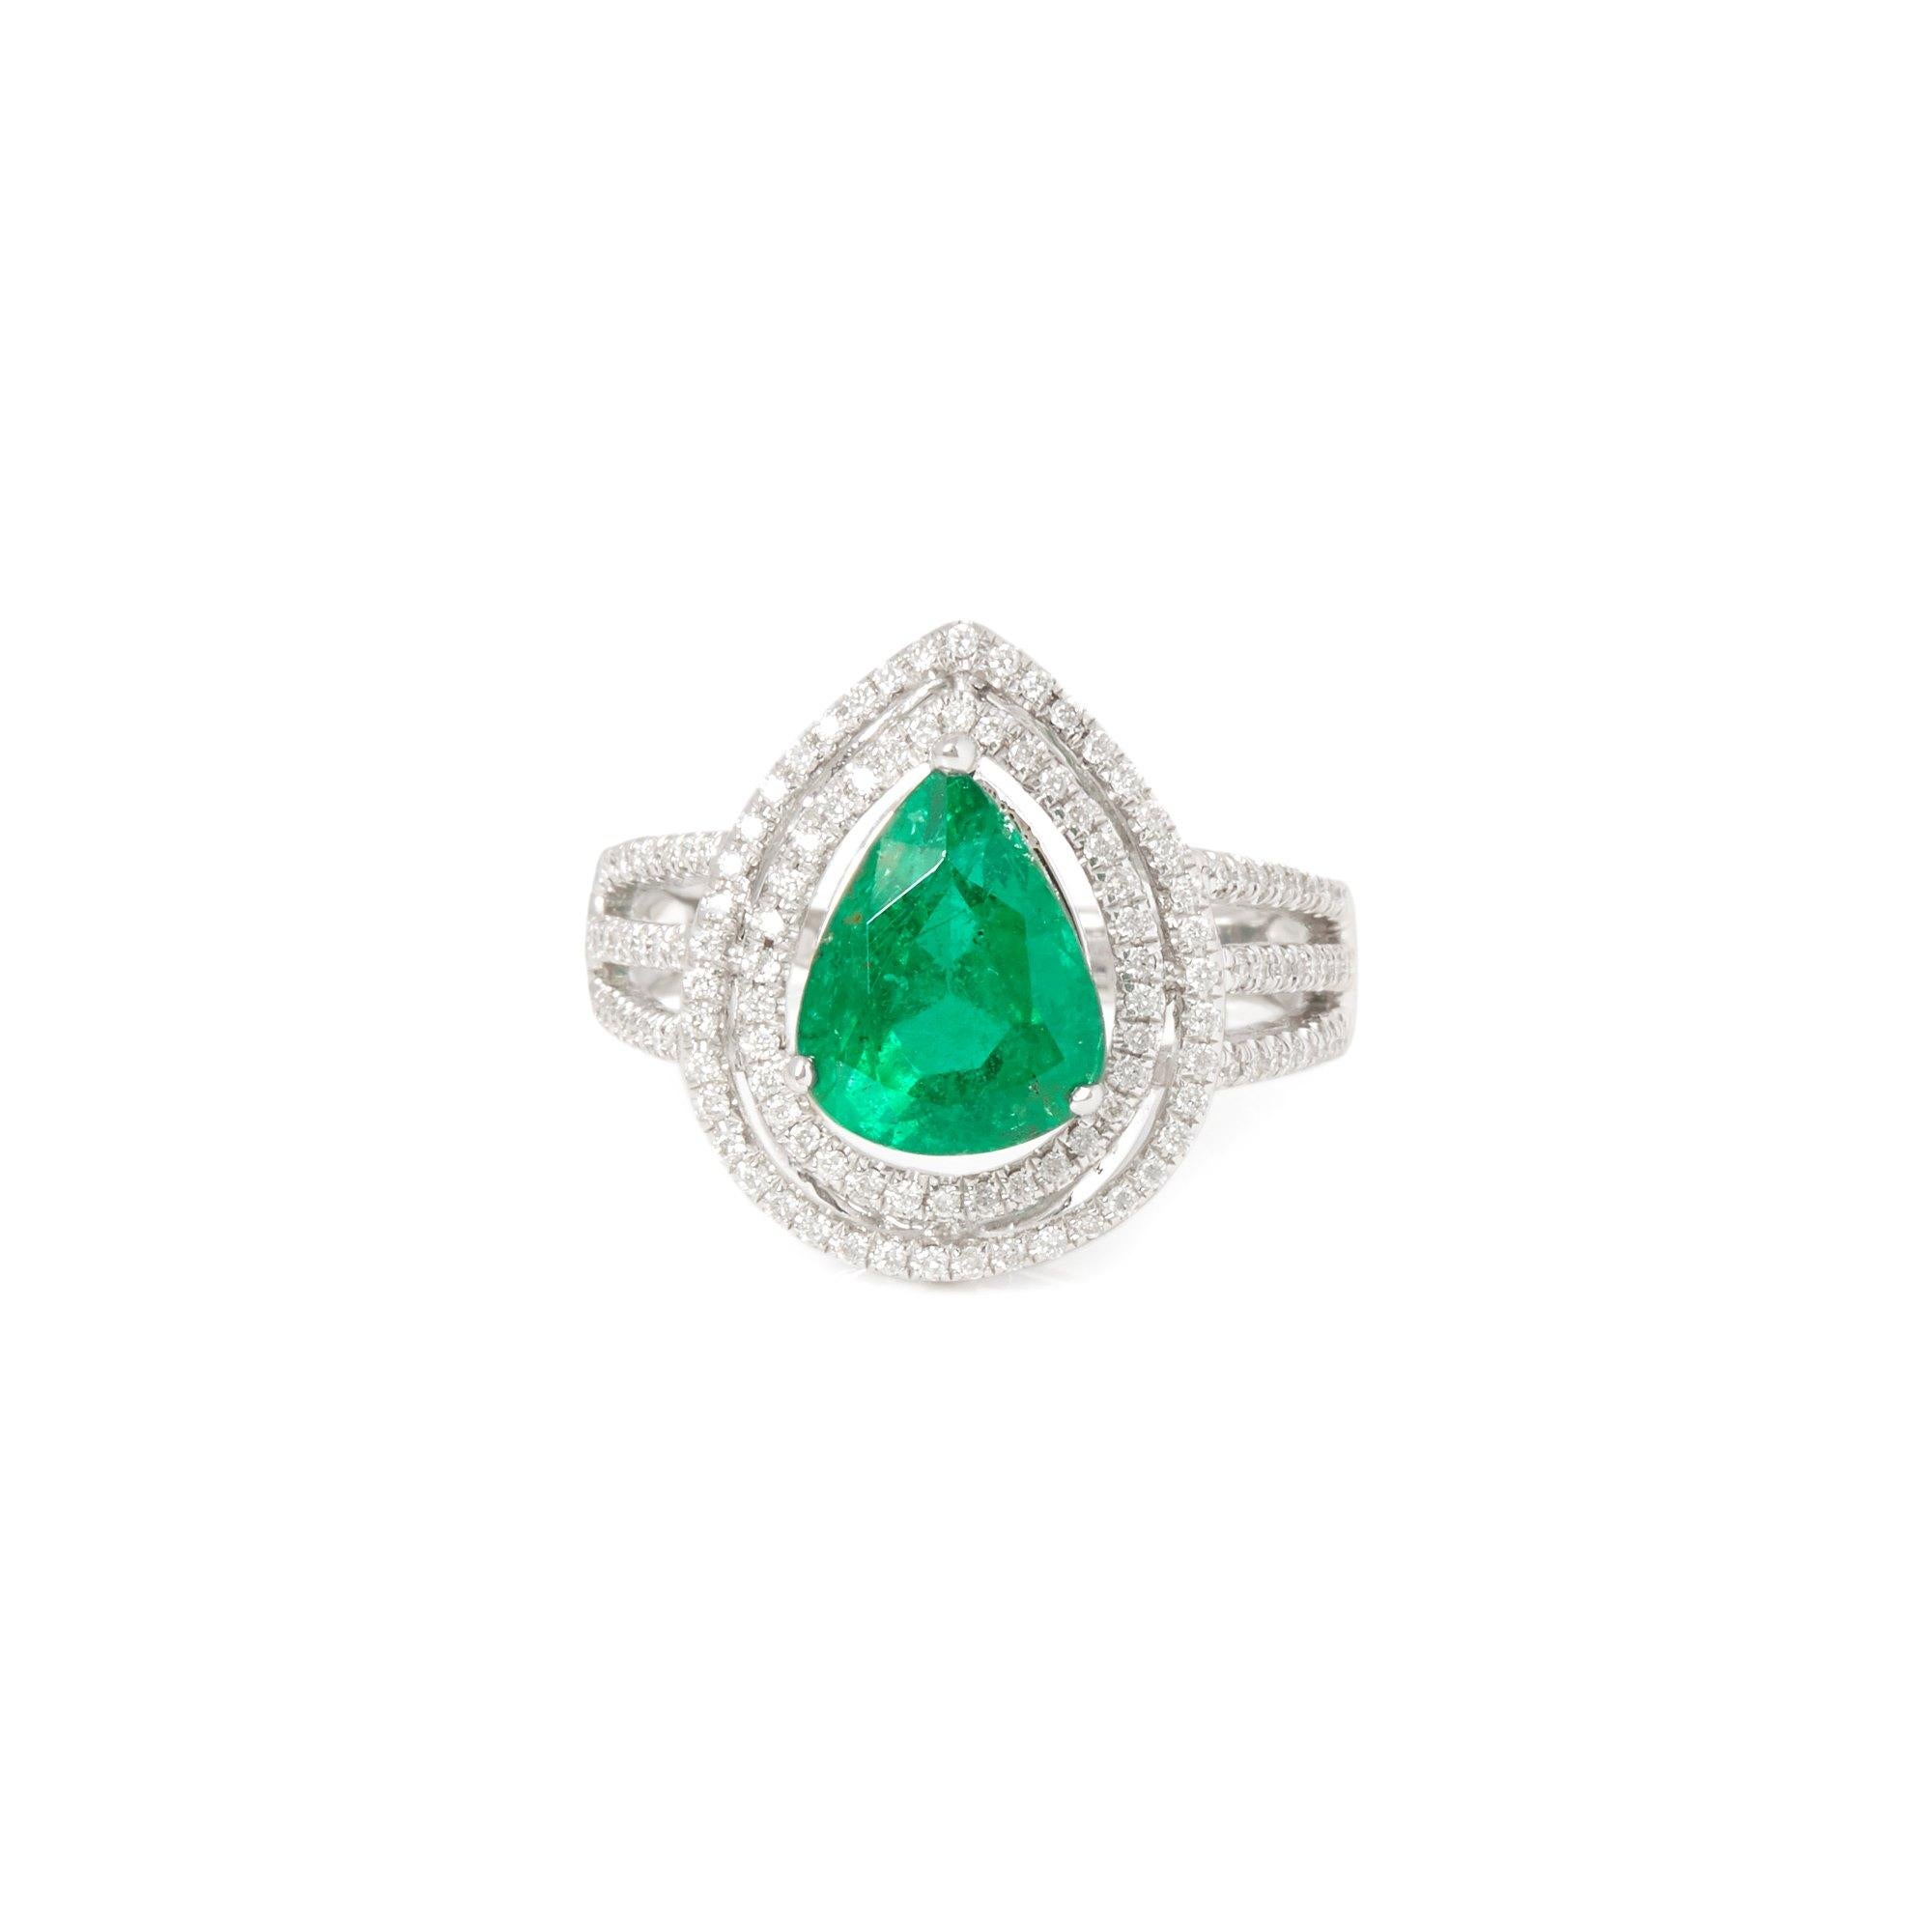 This ring designed by David Jerome is from his private collection and features one pear cut Emerald totalling 3.68cts sourced in Zambia. Set with round brilliant cut Diamonds totalling 0.91cts mounted in an 18k white gold Setting. UK finger size M